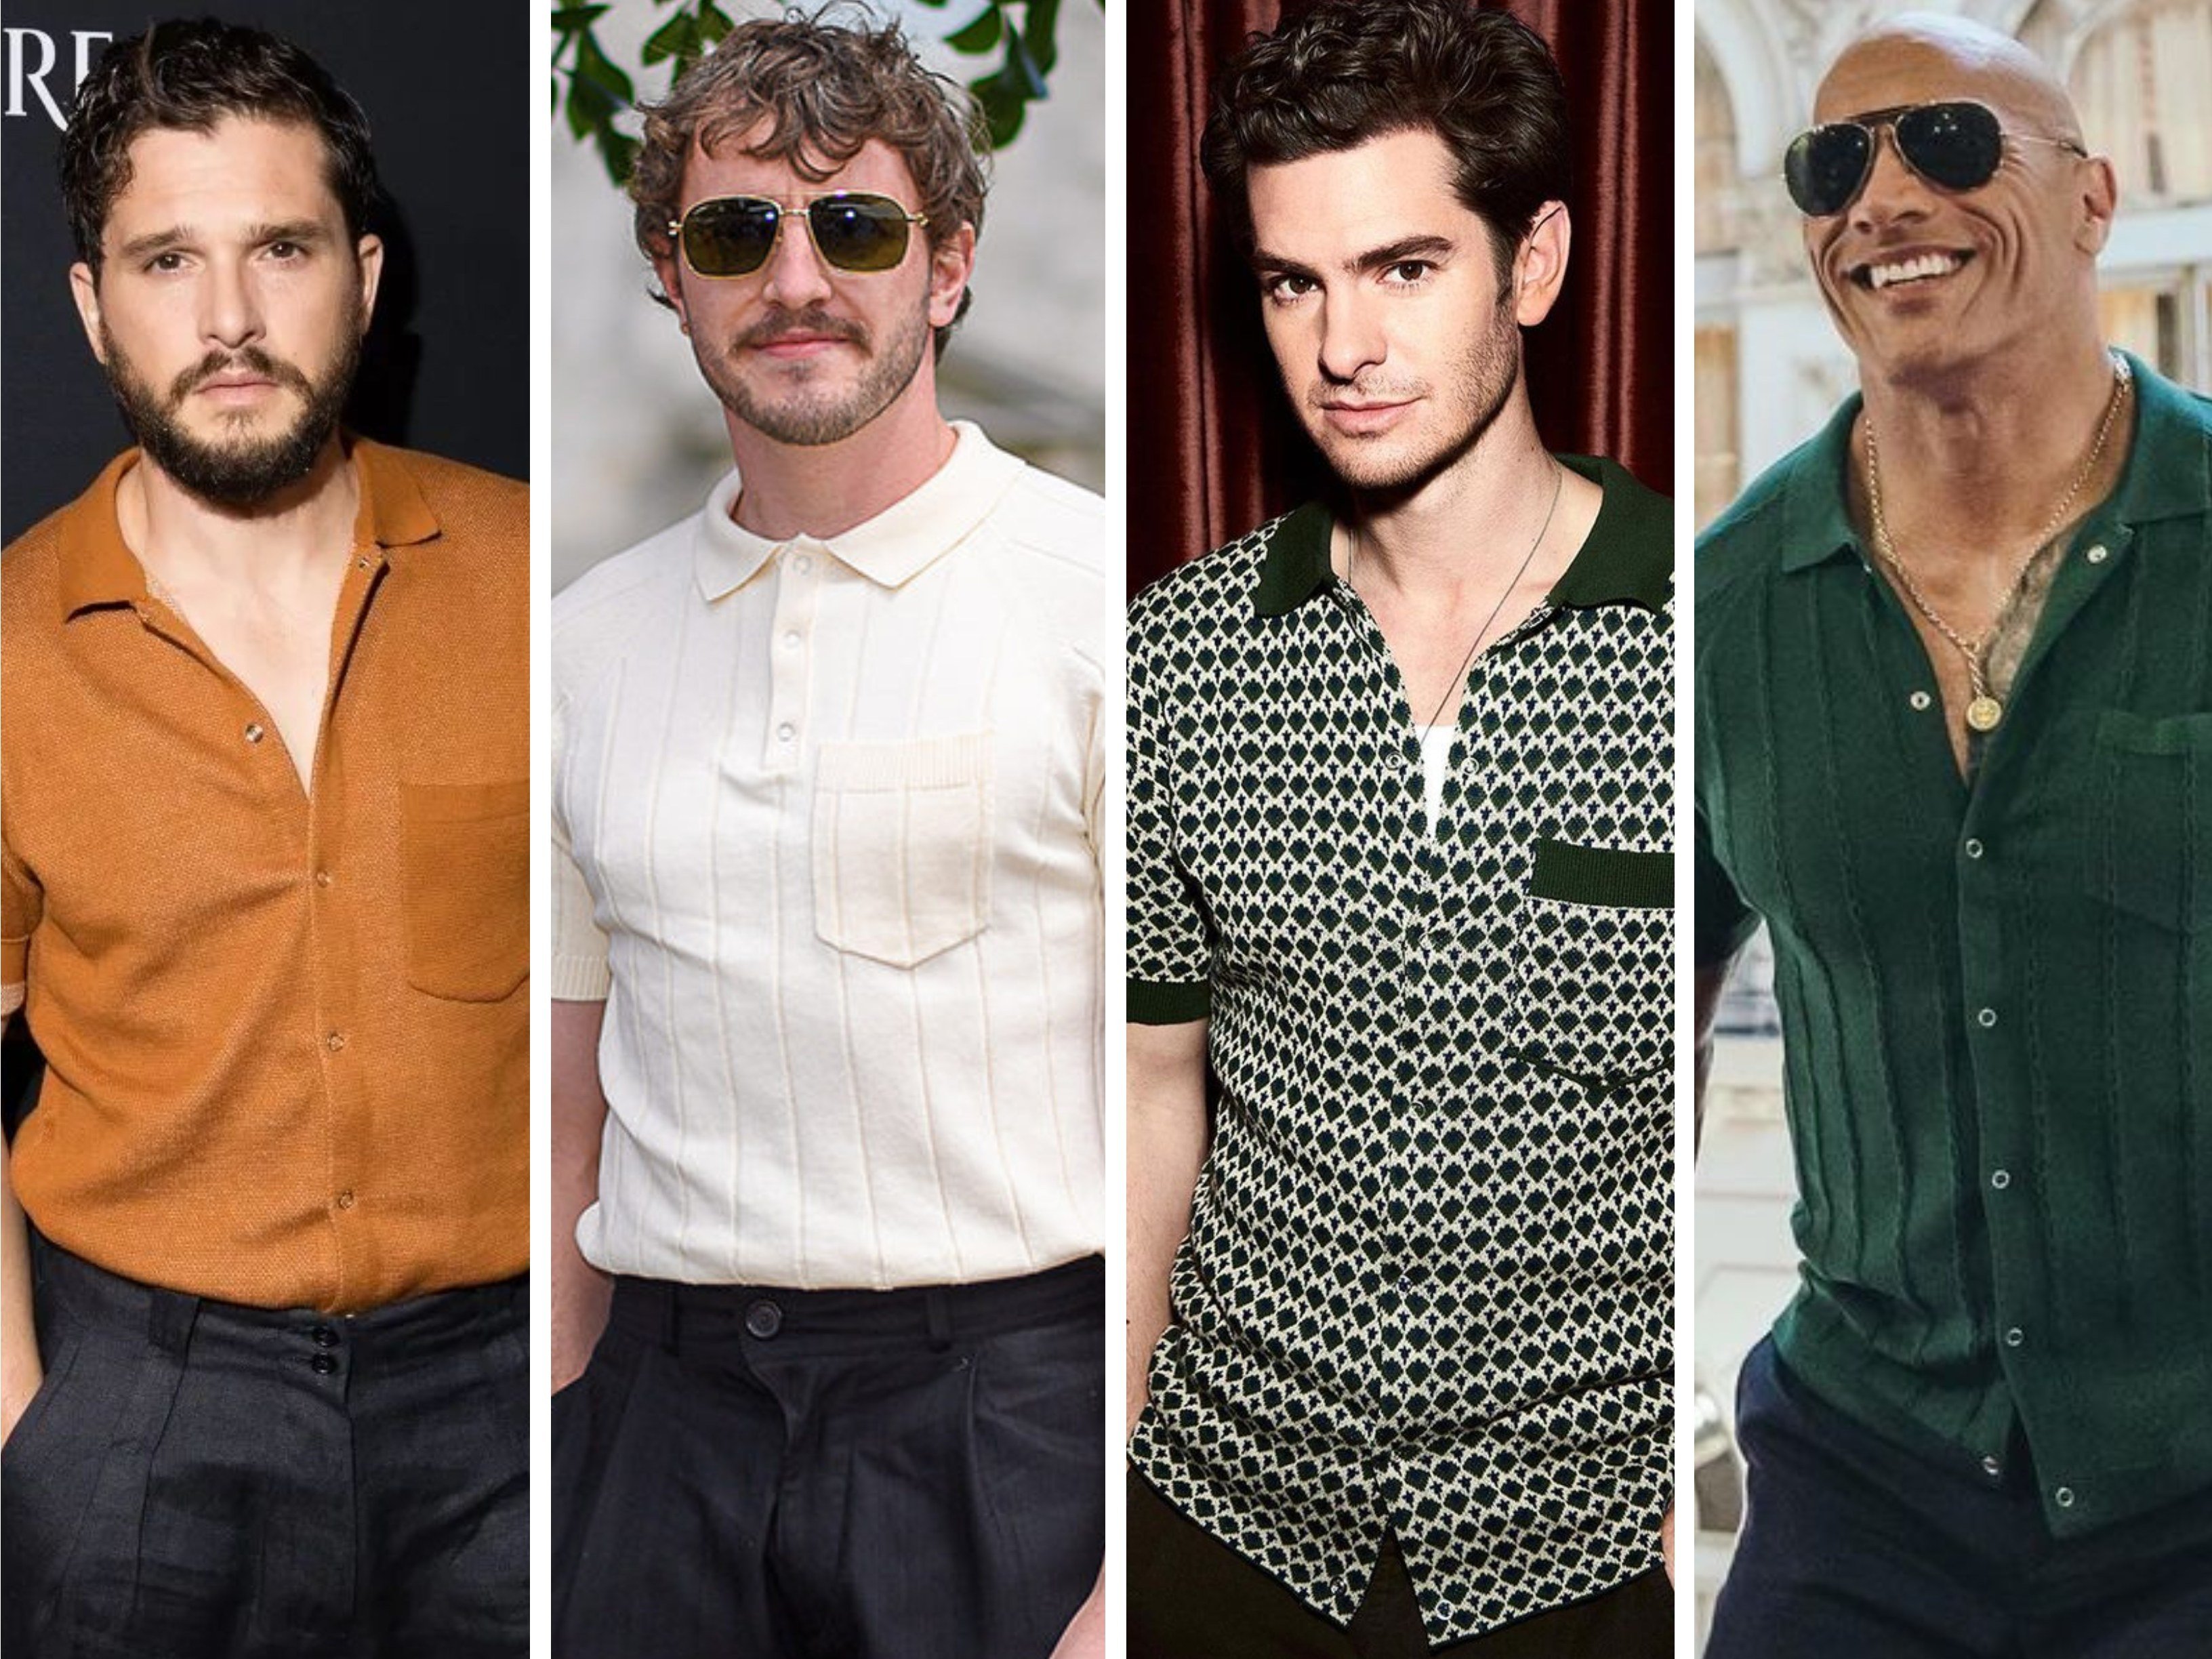 Kit Harrington, Paul Mescal, Andrew Garfield and Dwayne Johnson have all been seen in a Percival polo shirt – but they all wore it very differently. Photos: @percival_menswear, @britishgq, @thisisamandaw, @bestoftorontonet/Instagram